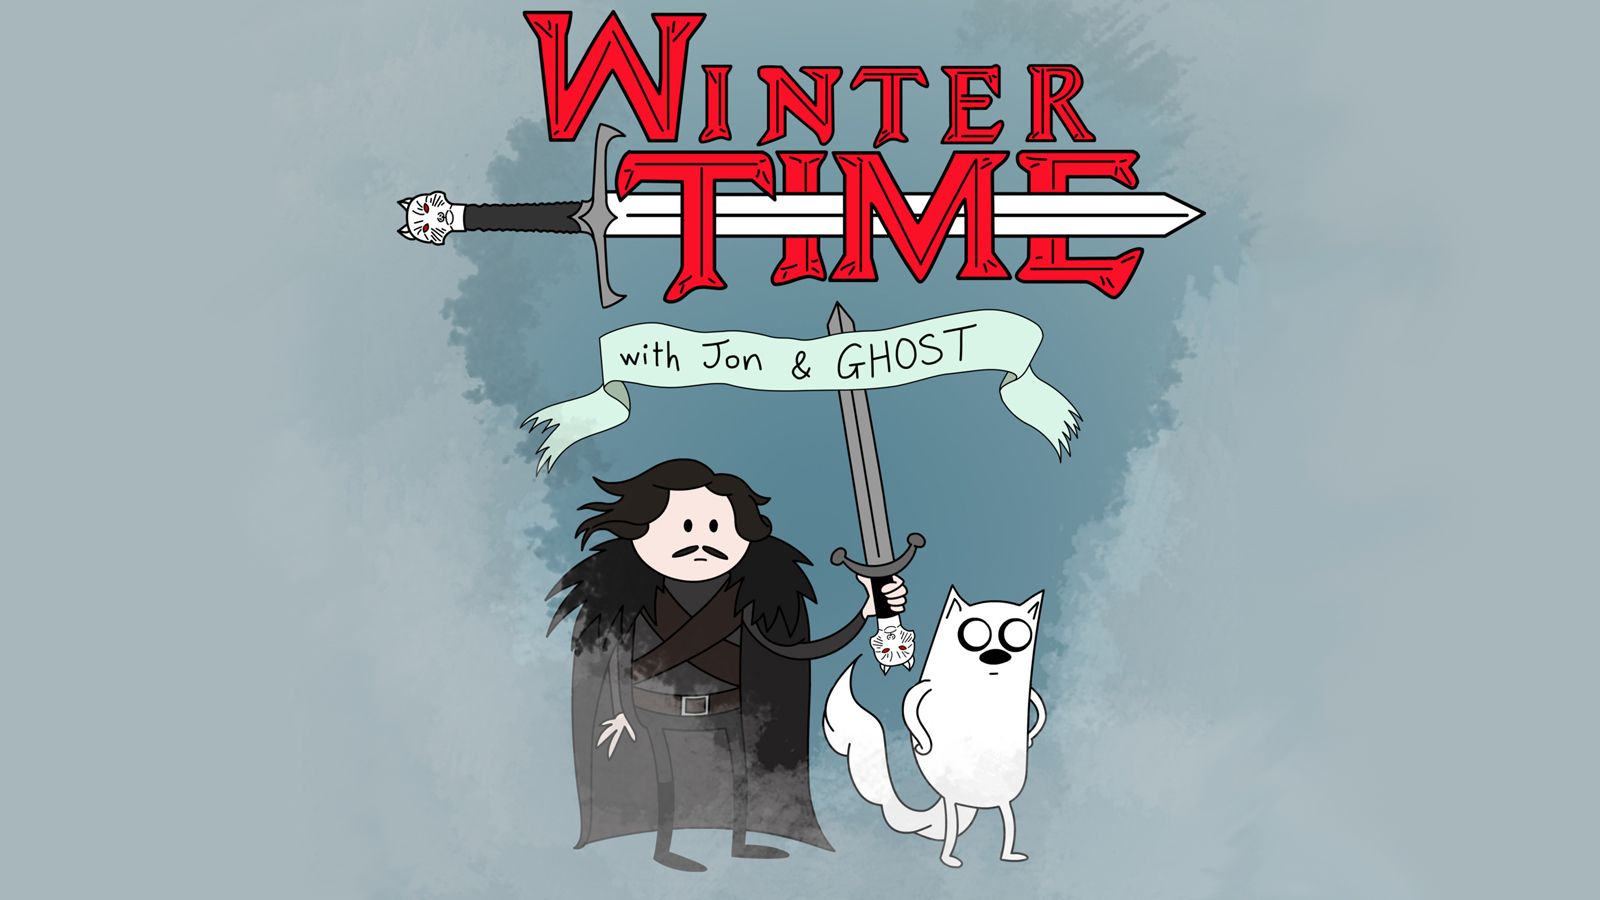 a song of ice and fire, jon snow, adventure time, ghost, humor, game of thrones, movie